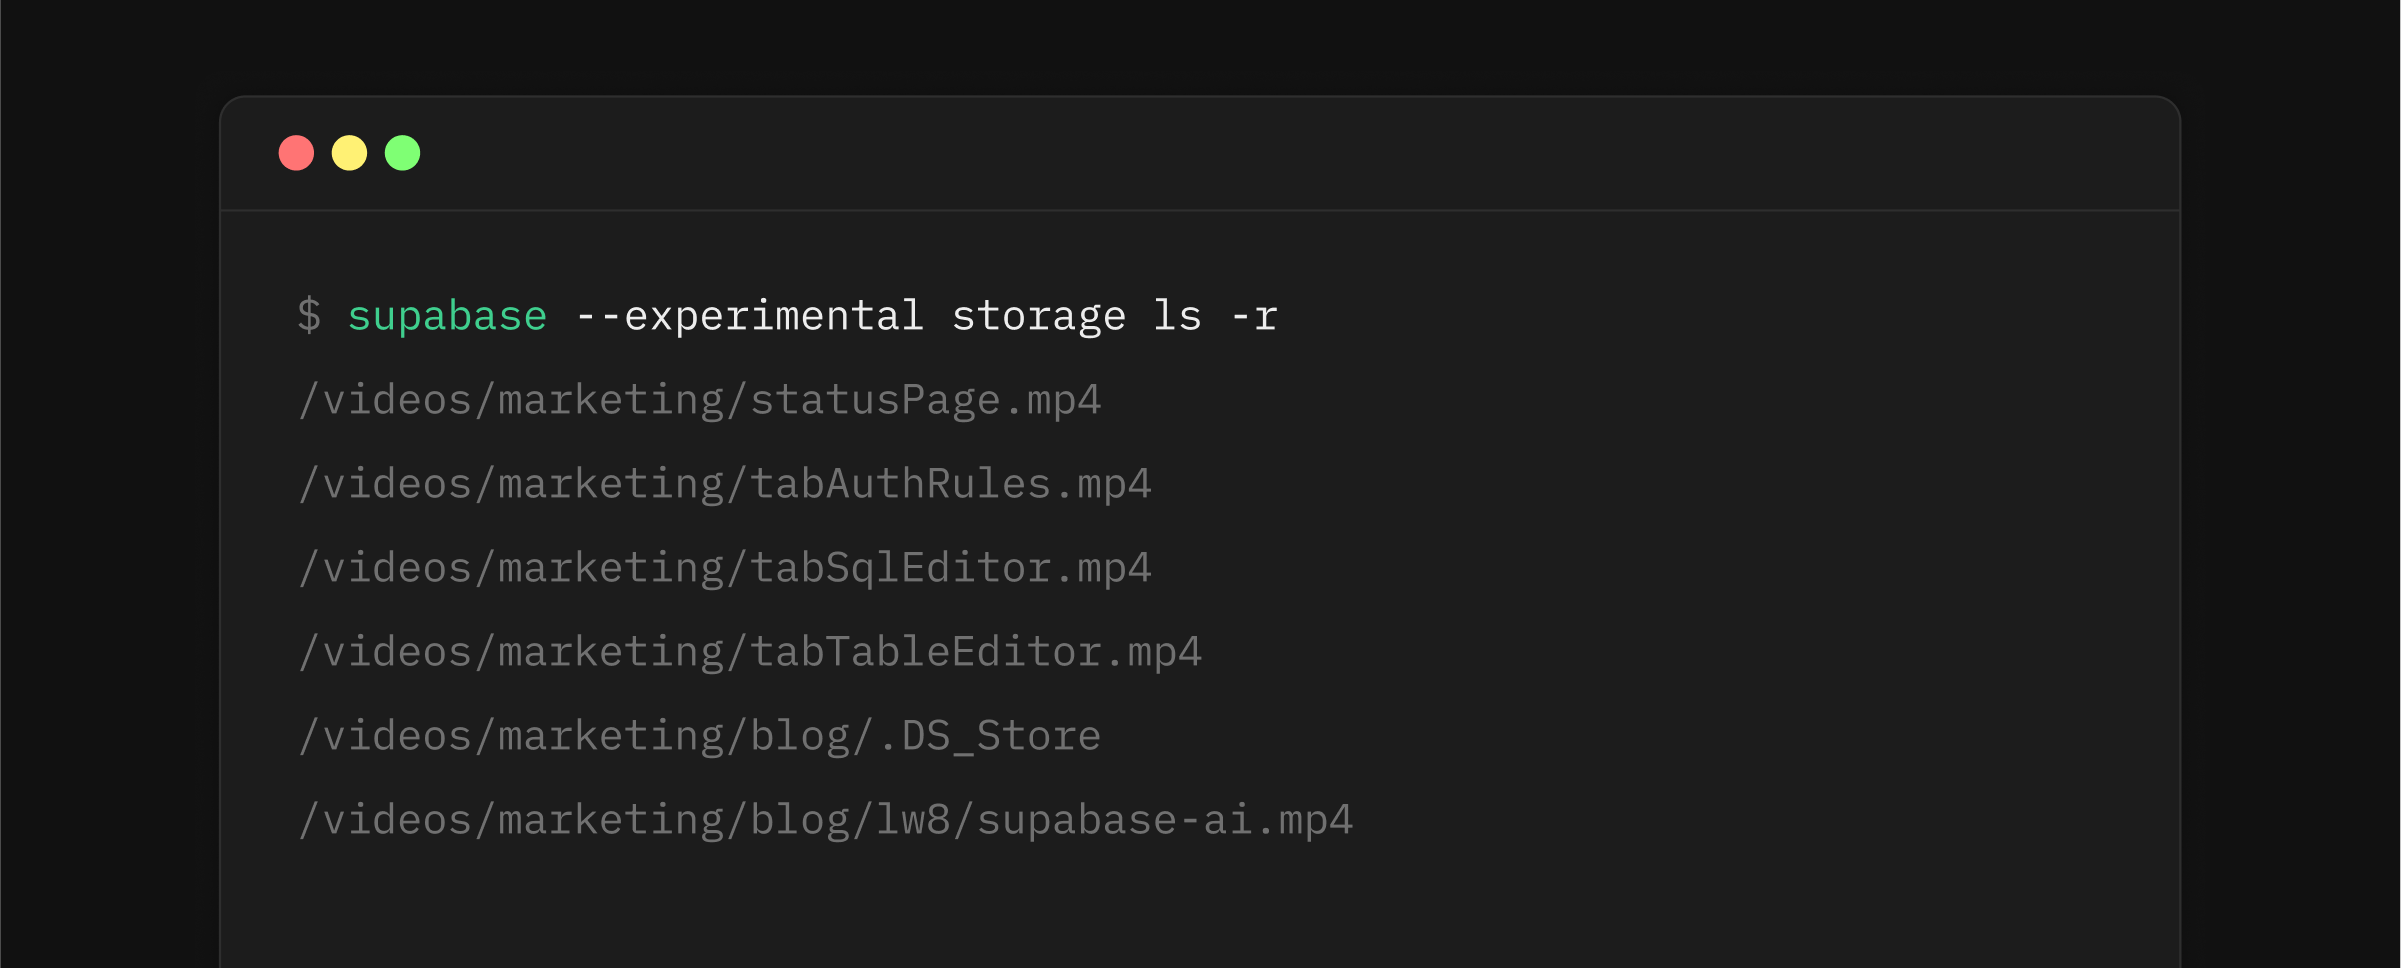 Manage storage buckets from the command line